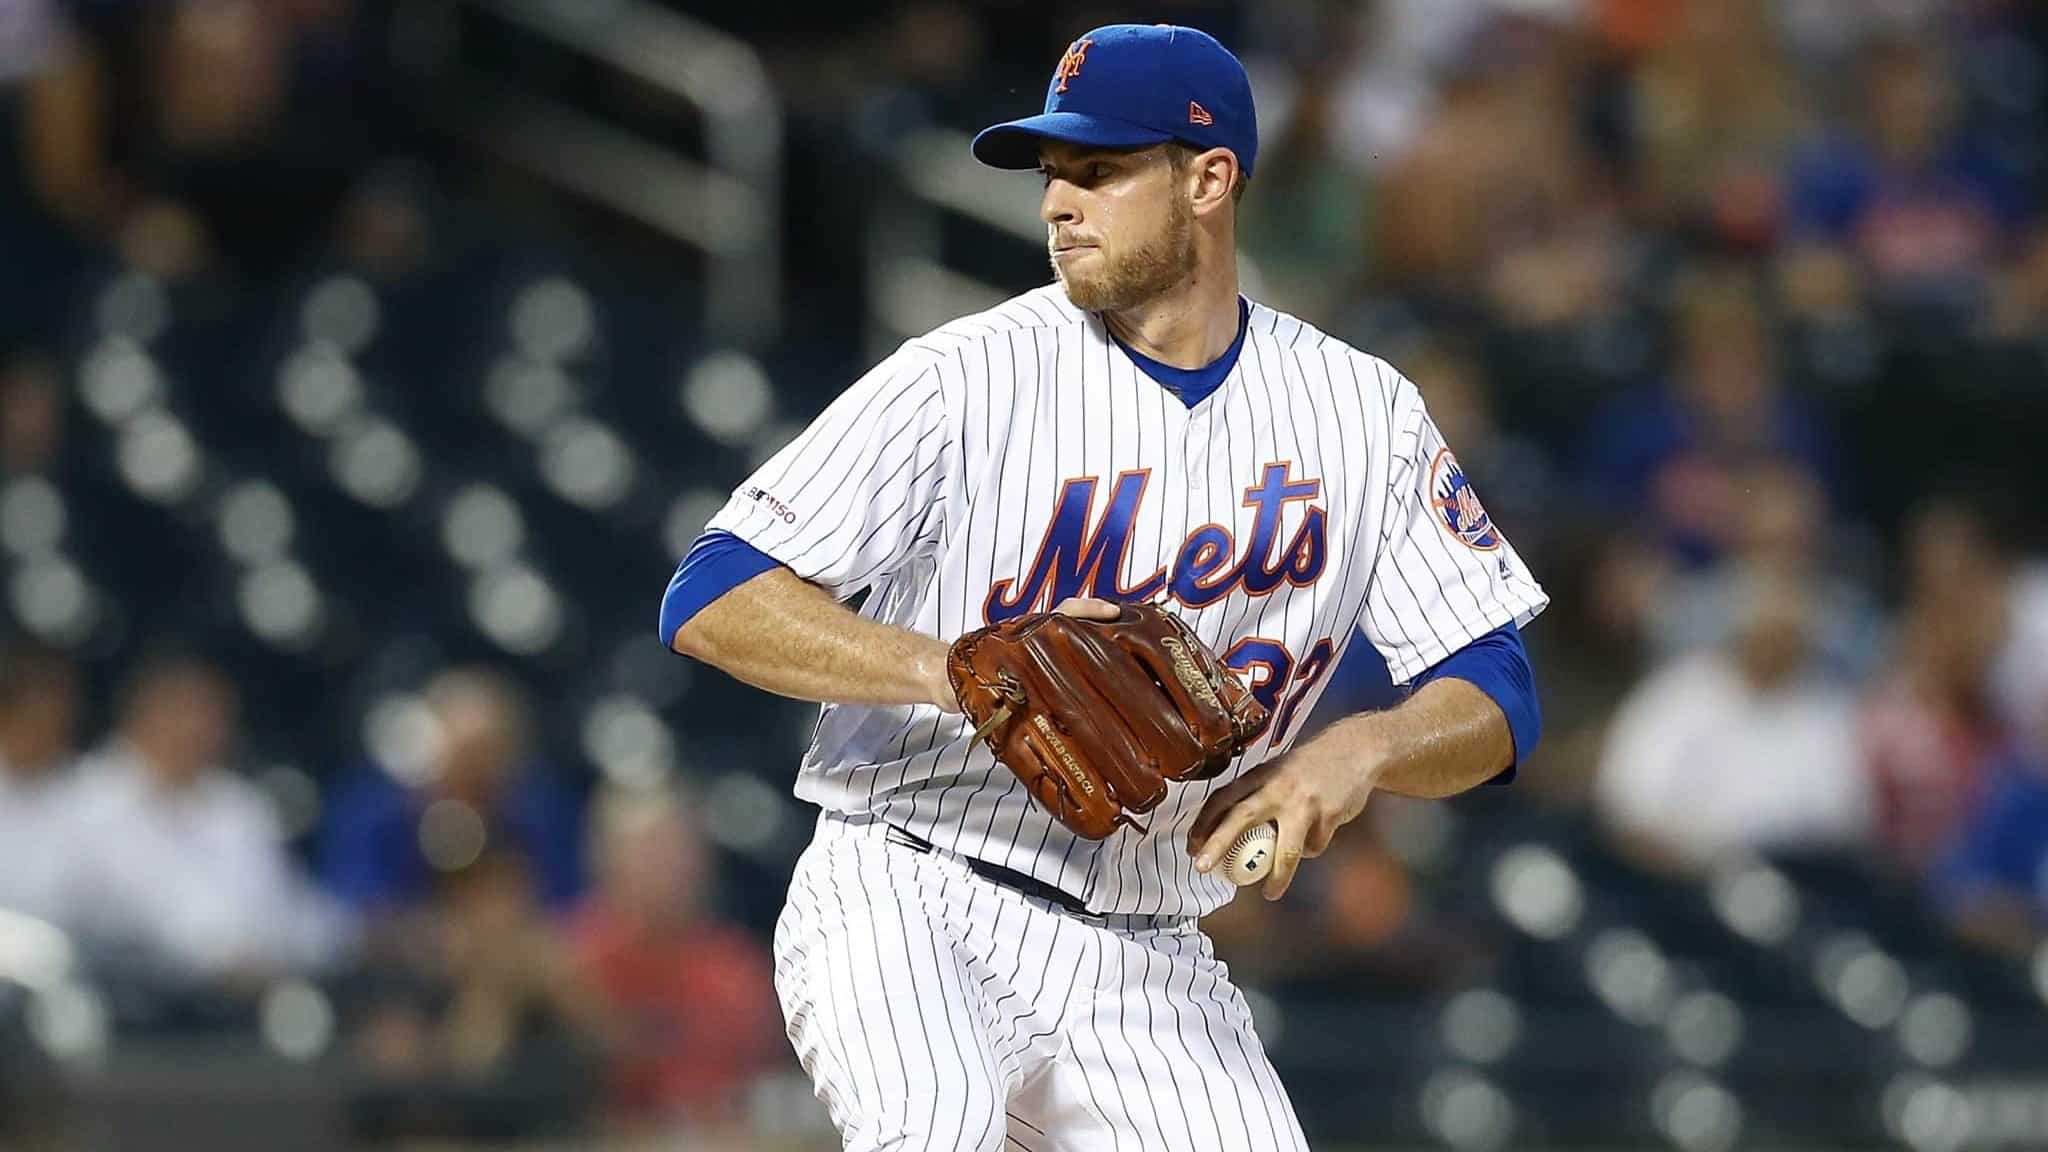 NEW YORK, NEW YORK - SEPTEMBER 11: Steven Matz #32 of the New York Mets pitches in the first inning against the Arizona Diamondbacks at Citi Field on September 11, 2019 in the Queens borough of New York City.